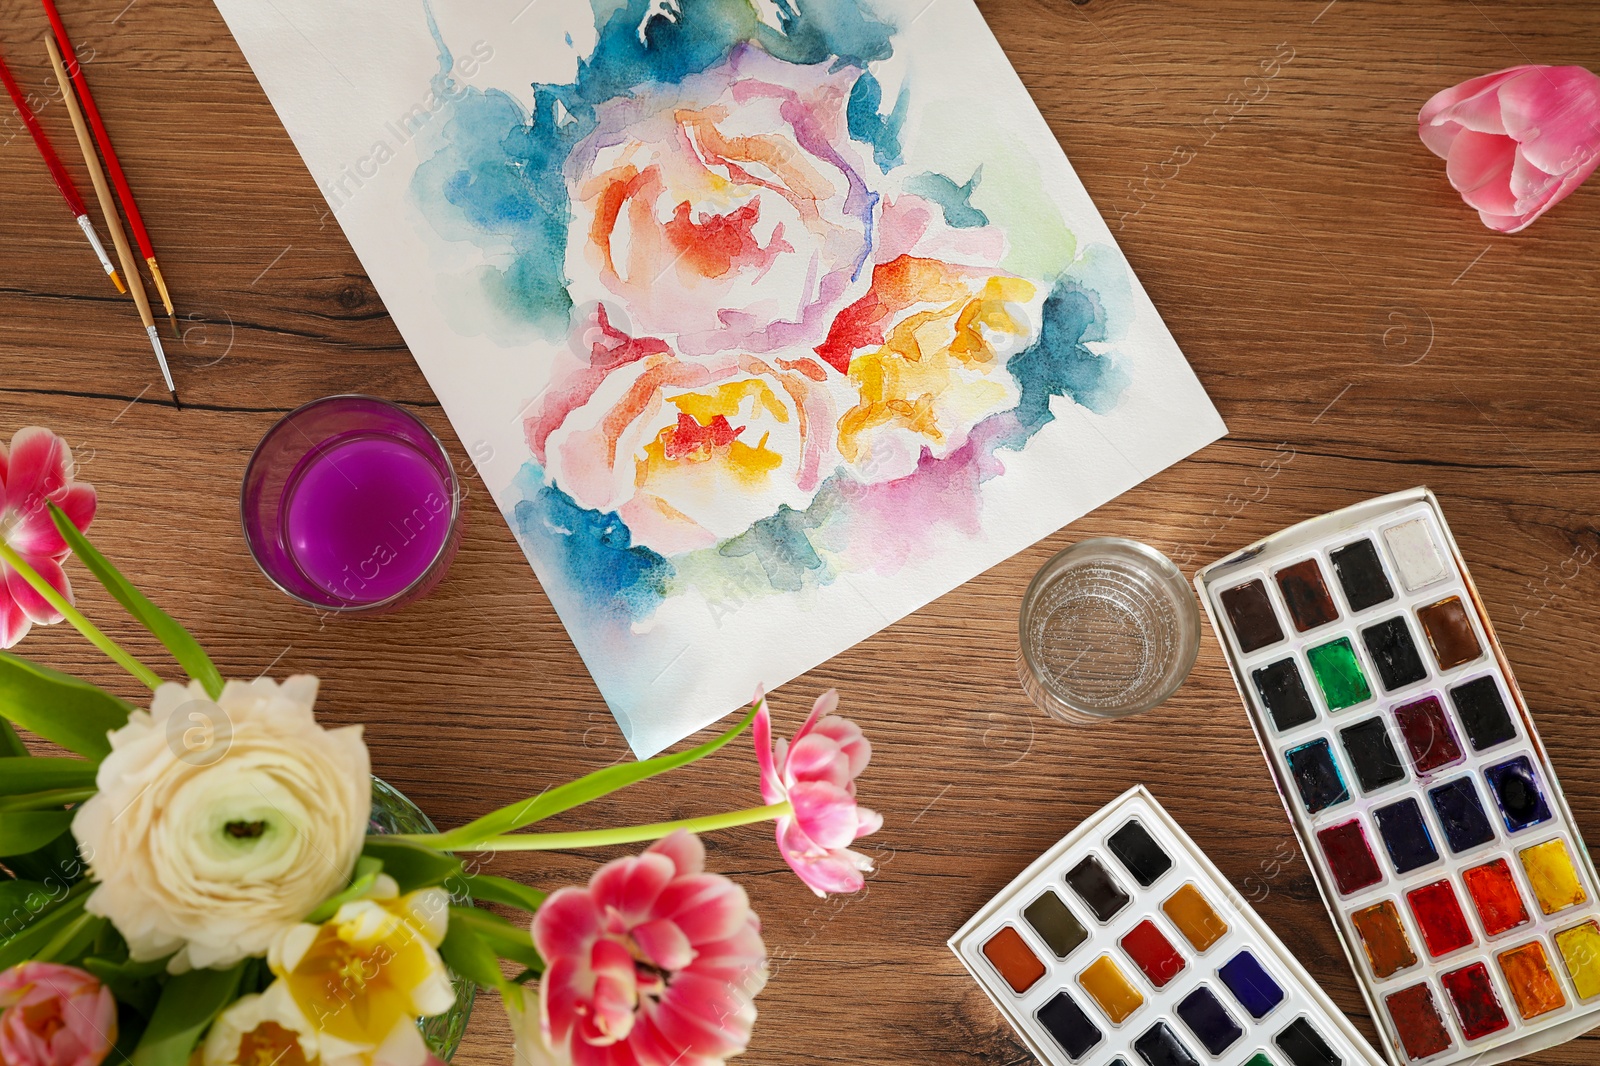 Photo of Flat lay composition with watercolor paints and floral picture on wooden table. Creative artwork